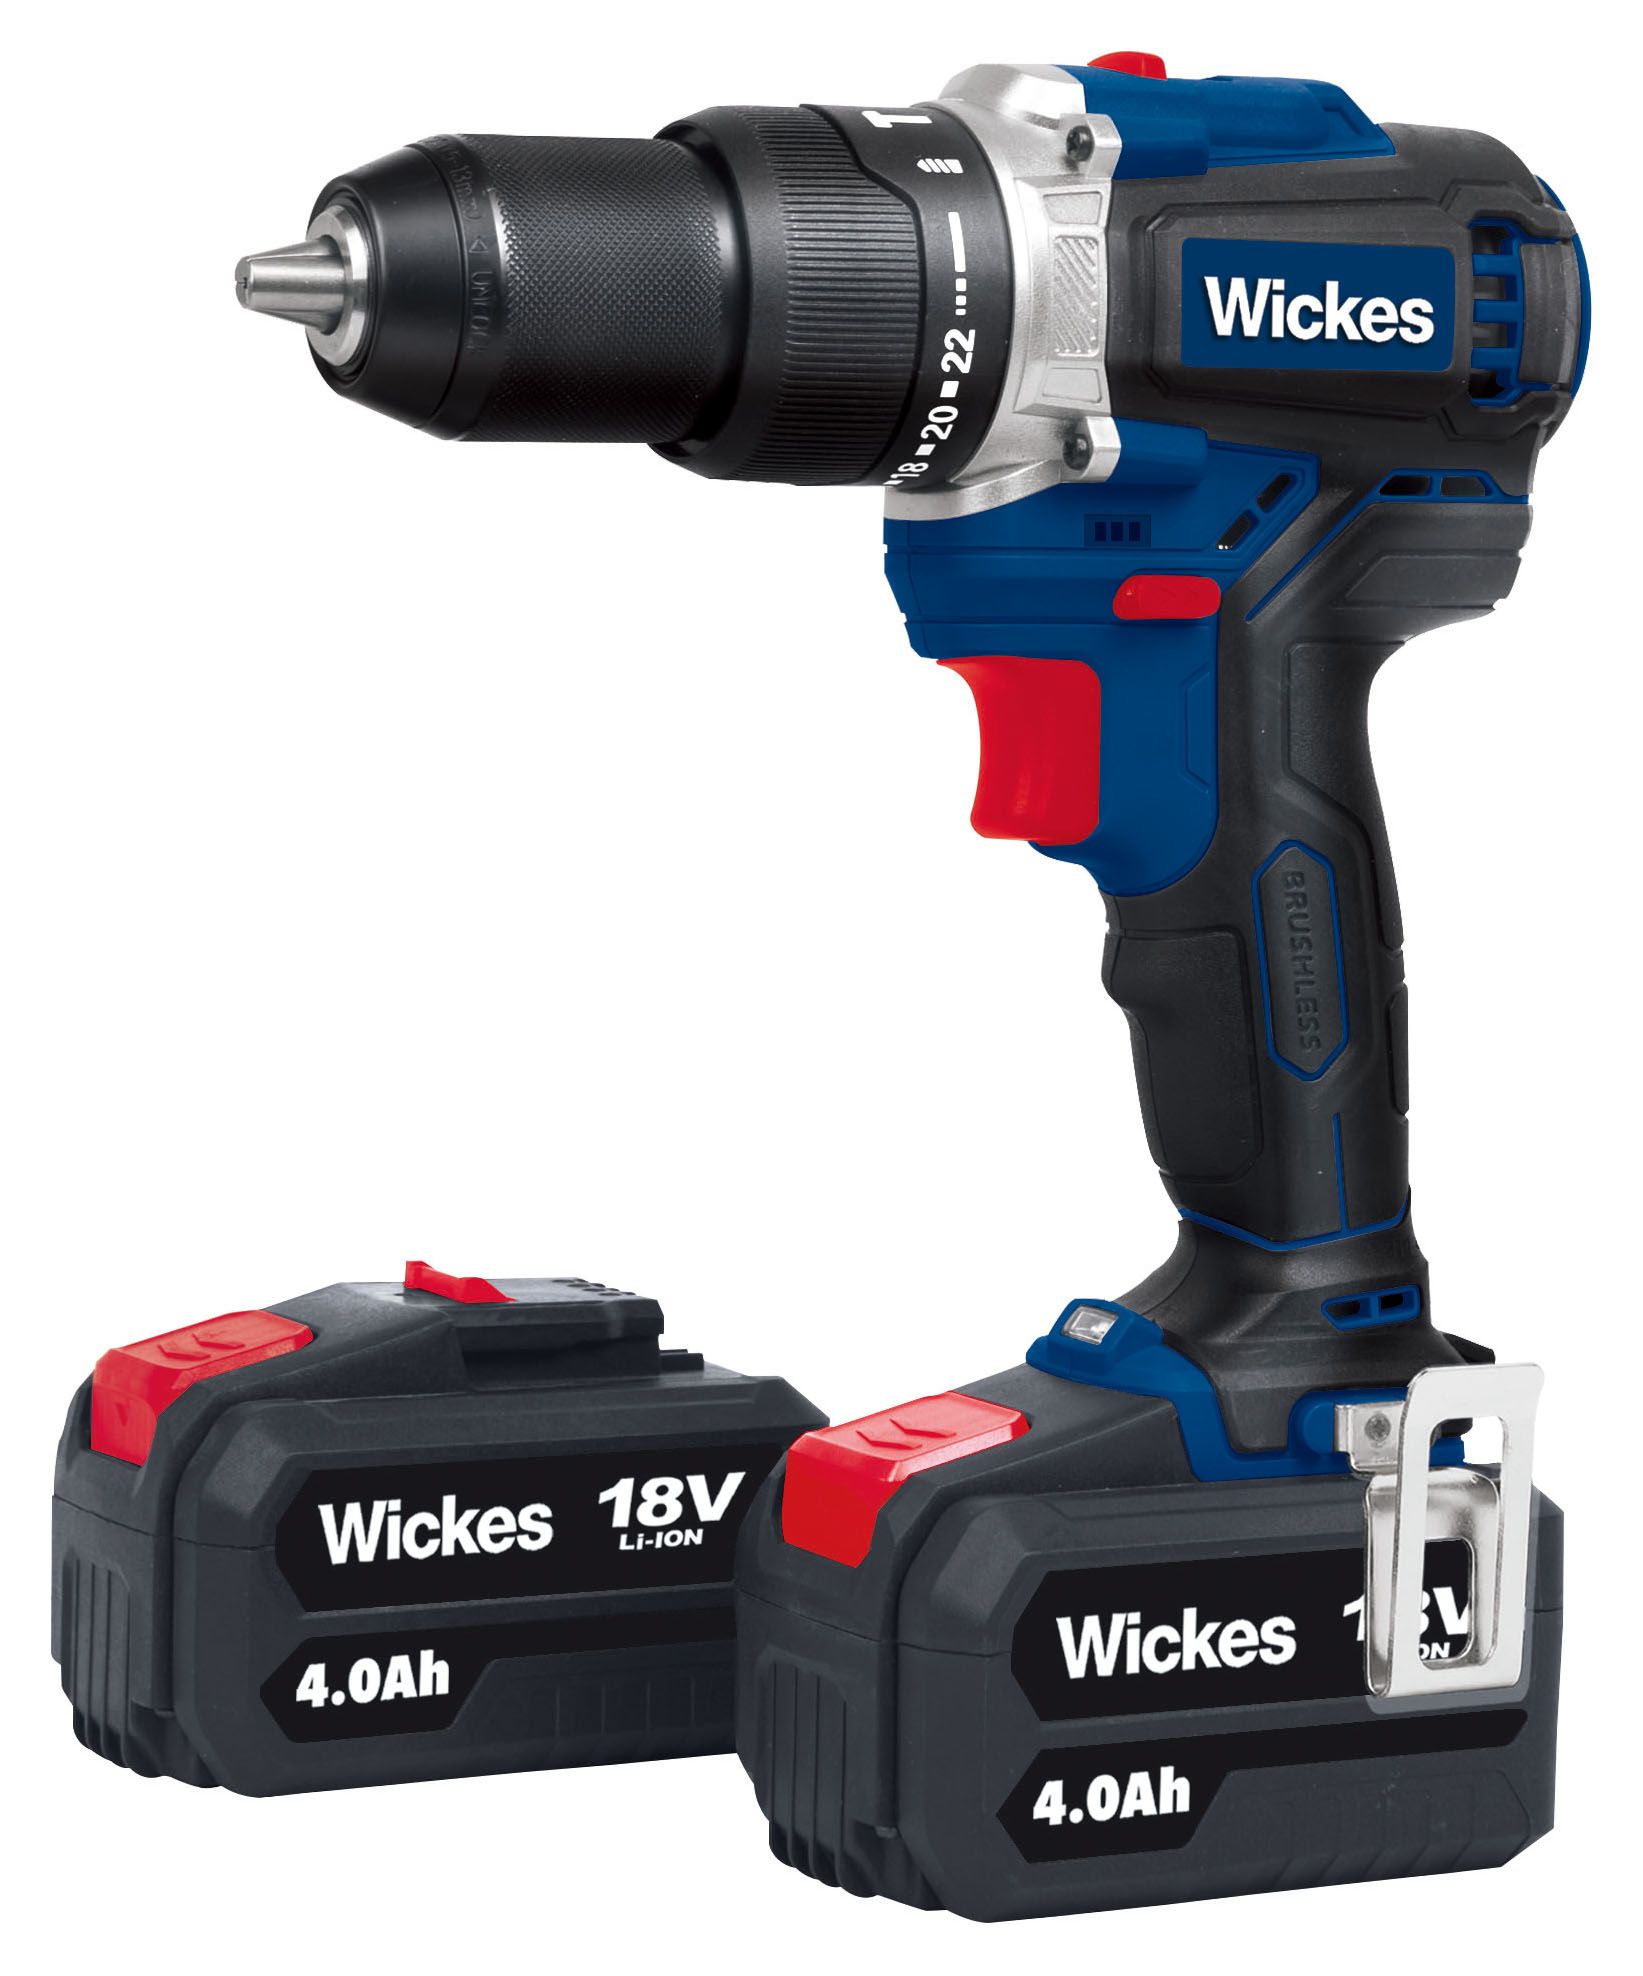 Image of Wickes 18V 2 x 4.0Ah Li-ion Cordless Brushless Combi Drill